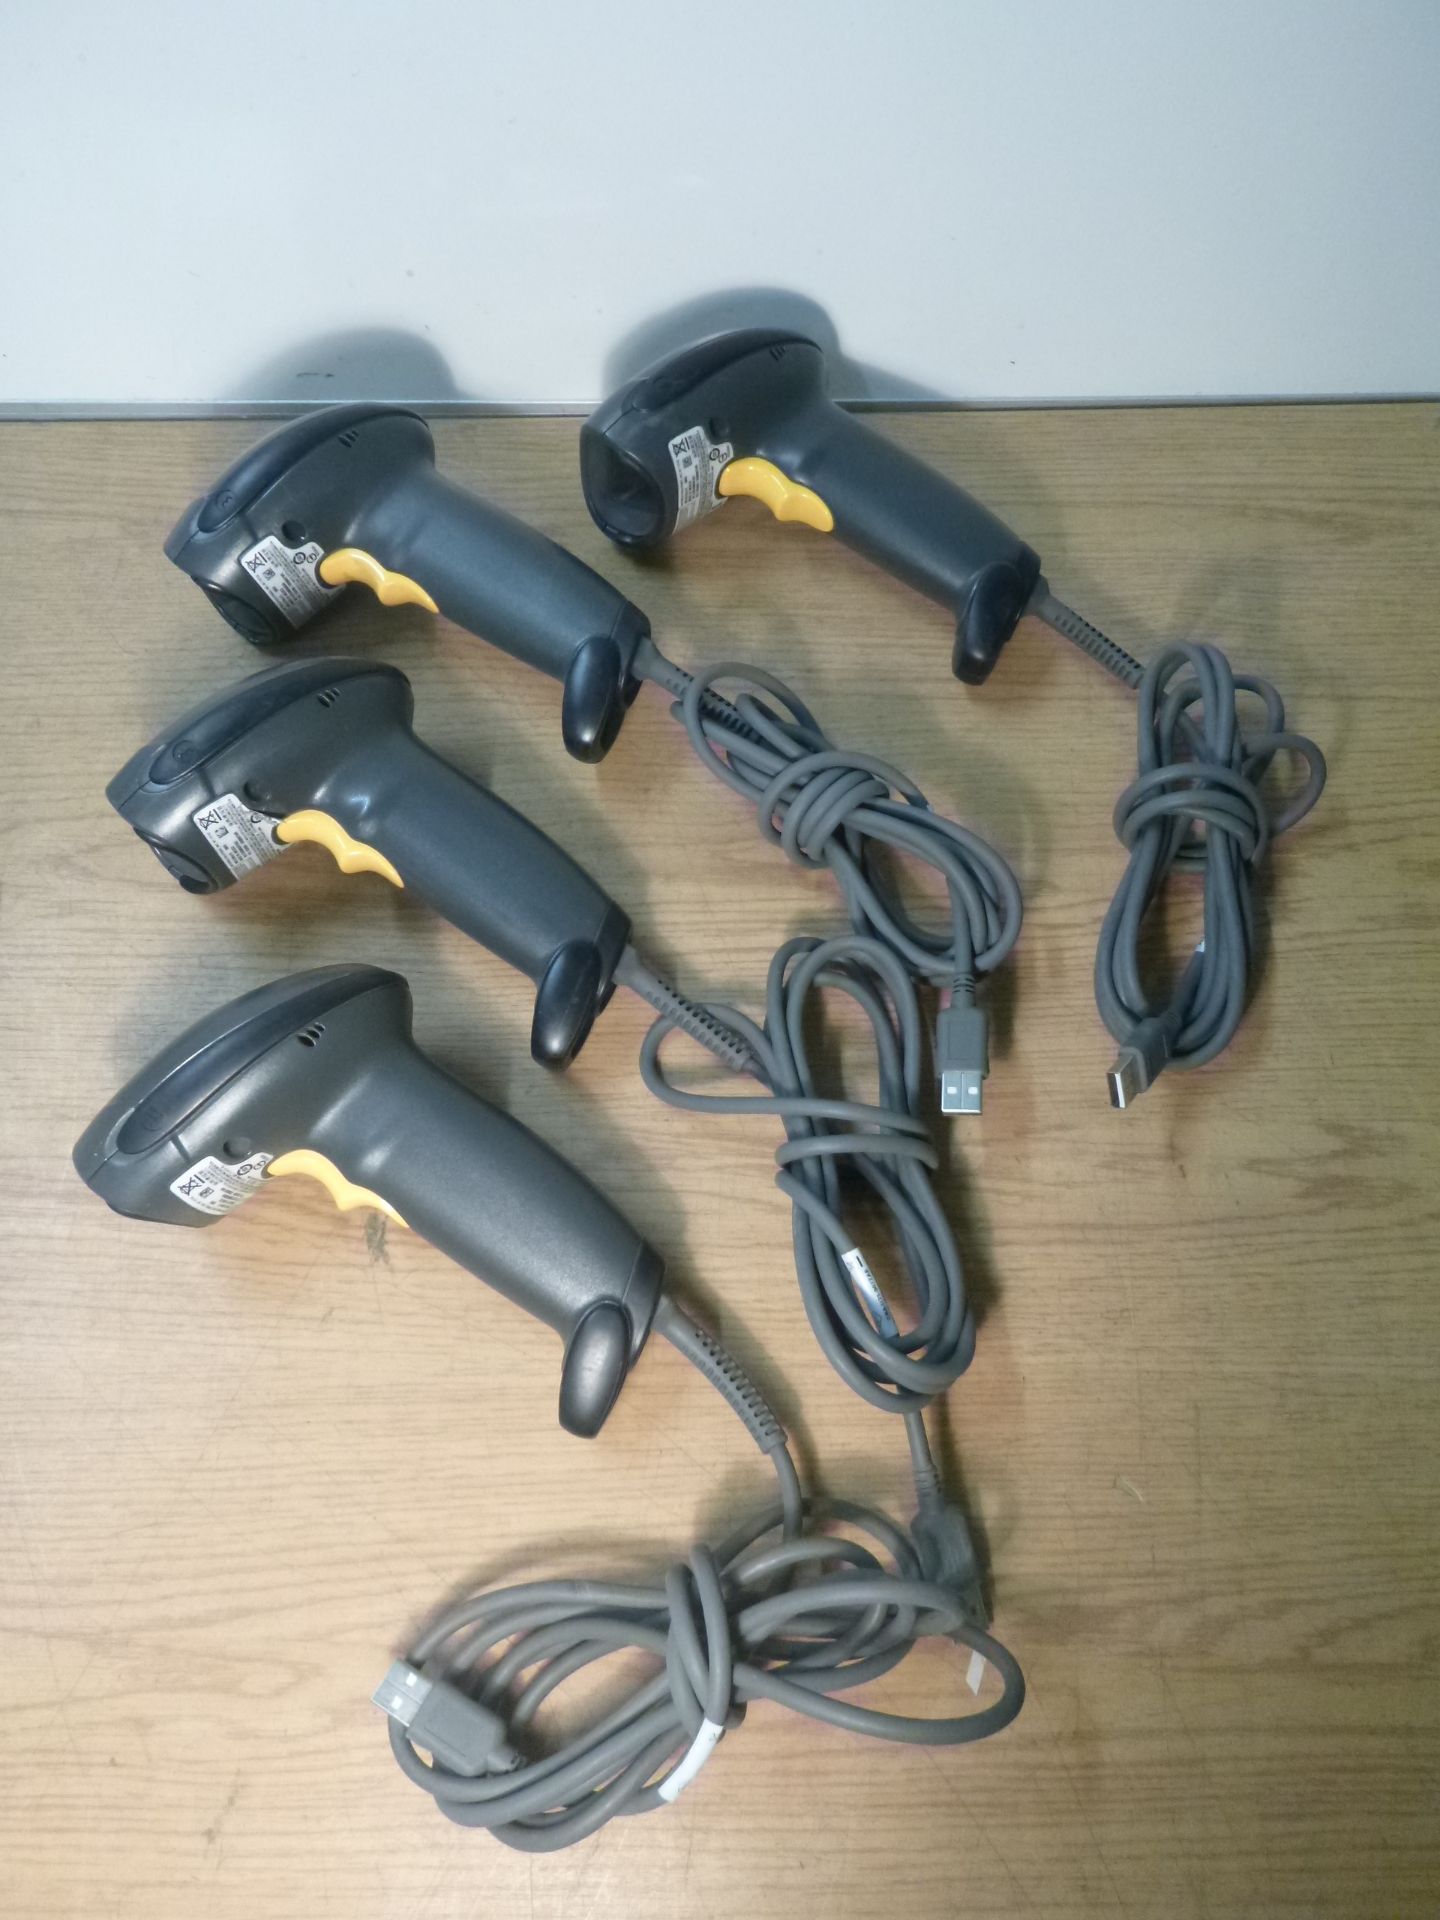 4 X MOTOROLA DS4208 USB HAND HELD BARCODE SCANNERS. TESTED, WORKING.